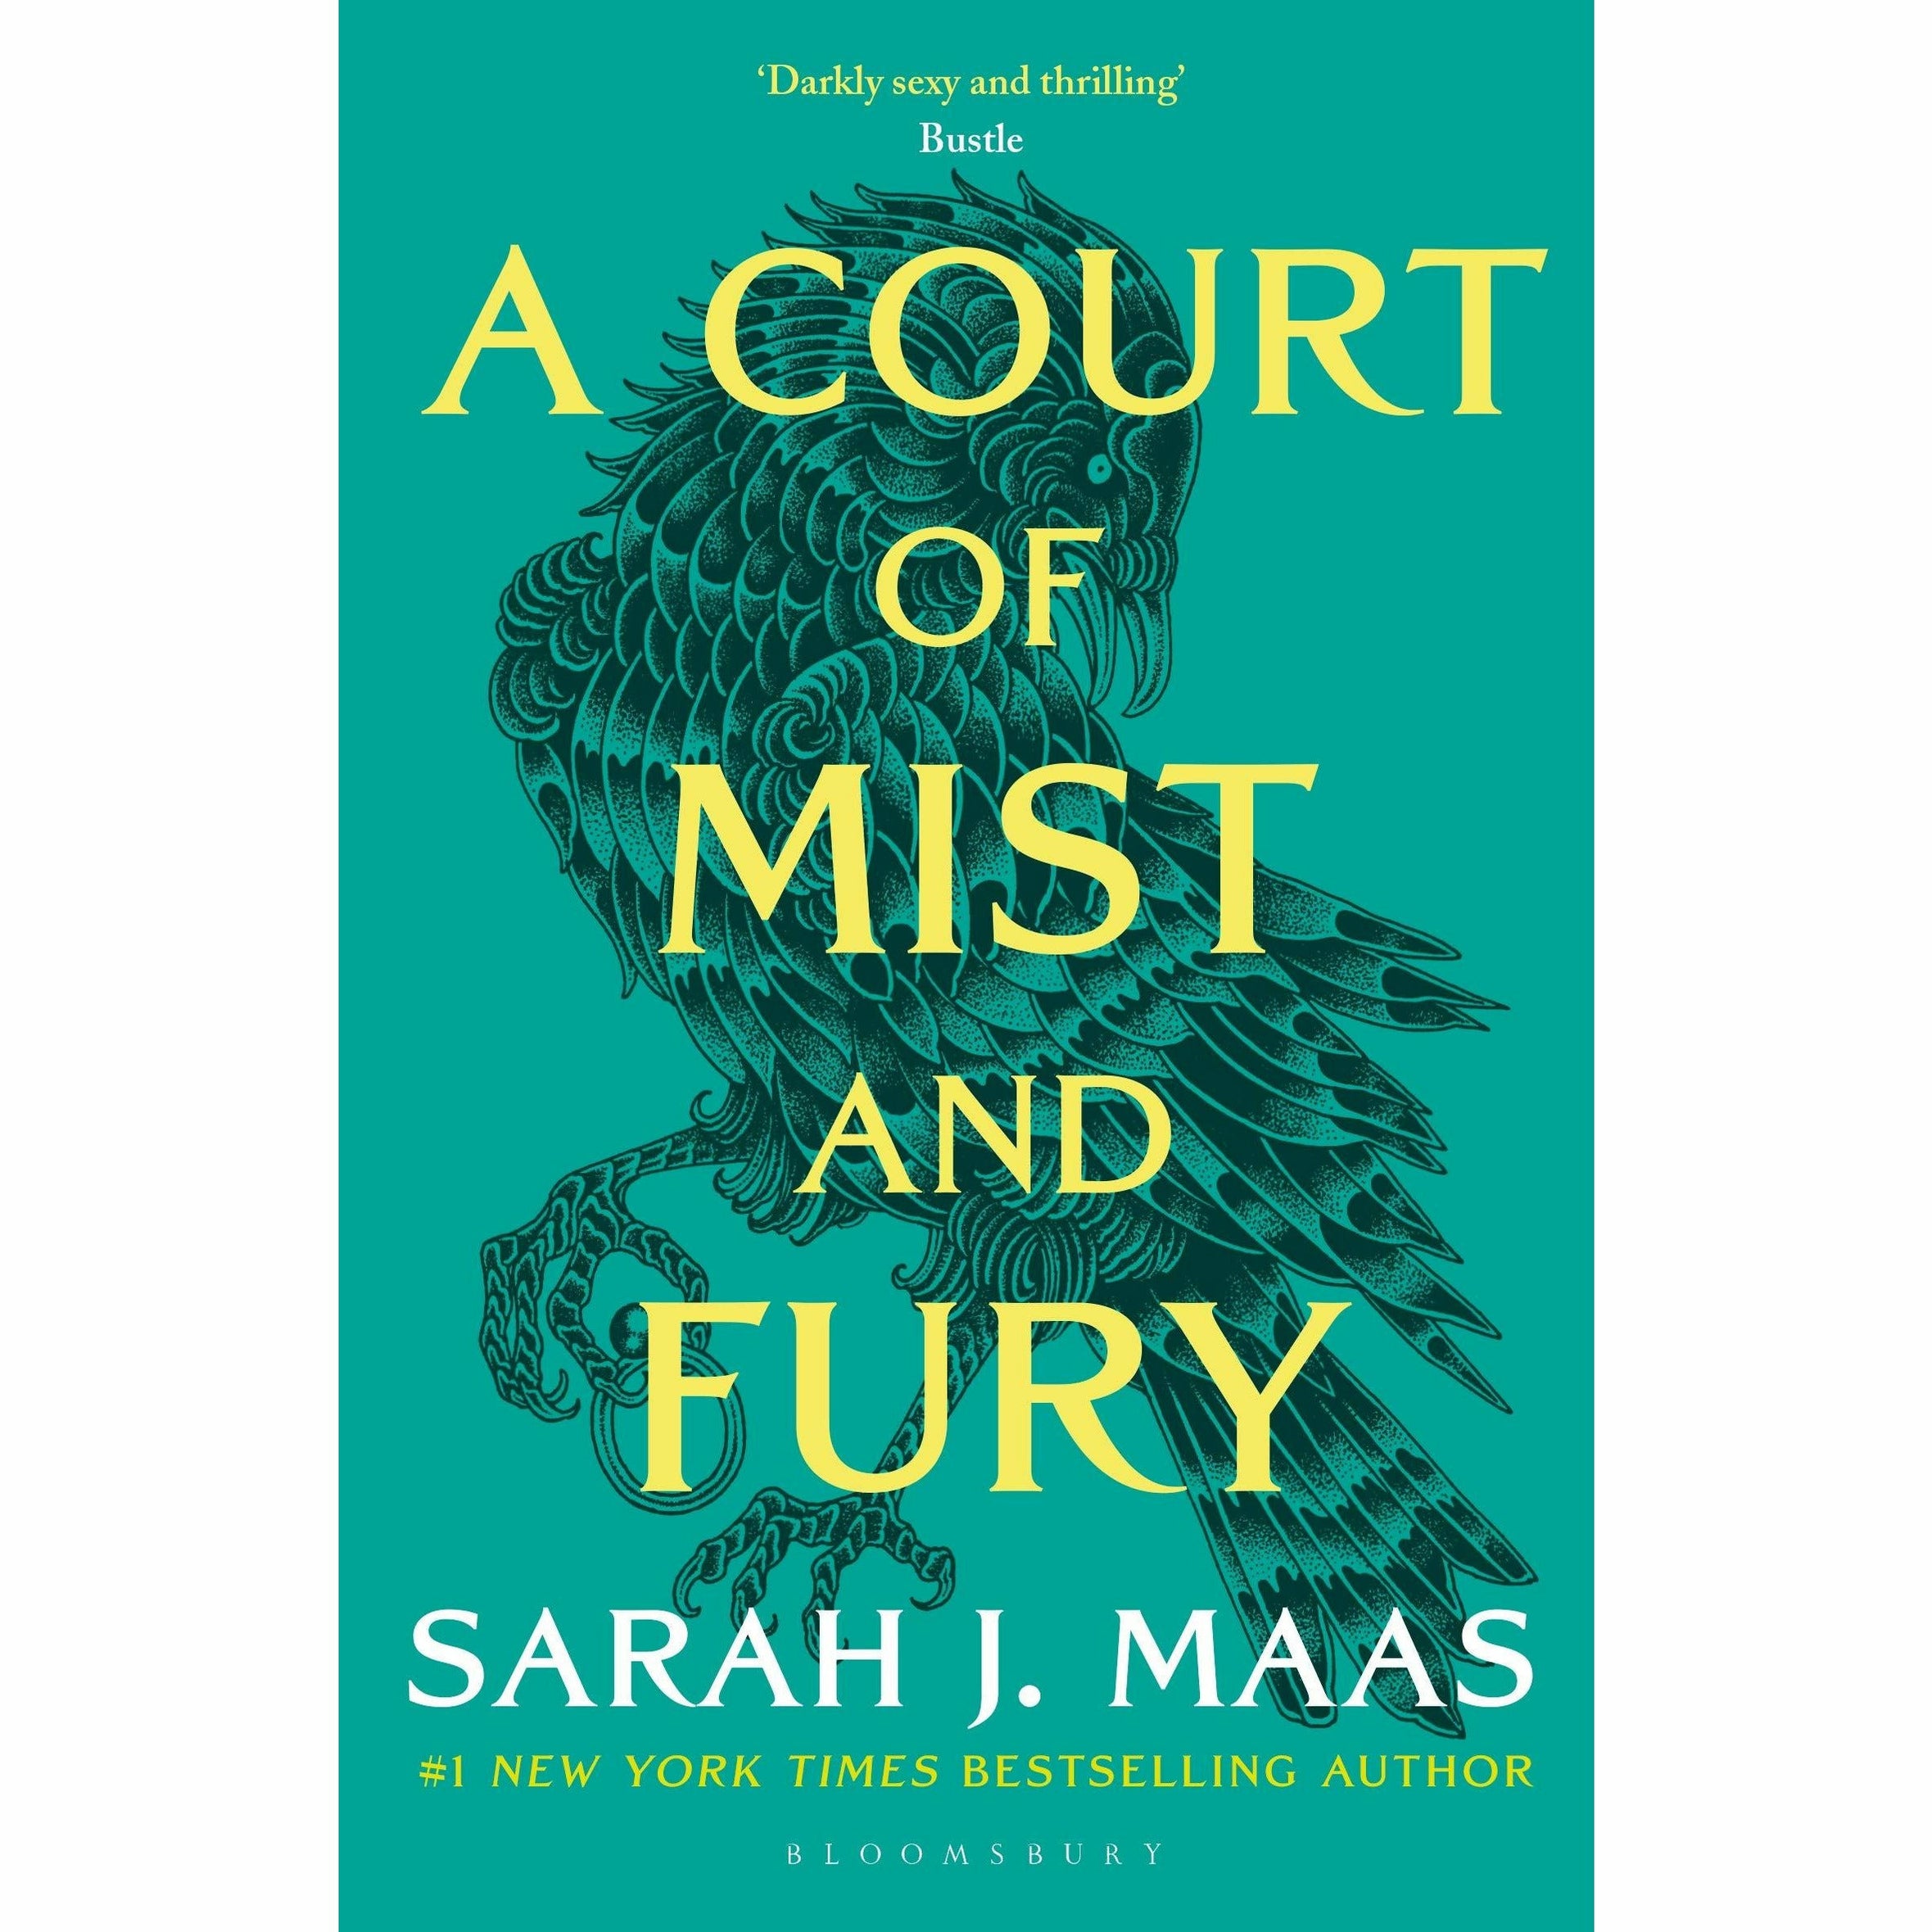 a court of thorns and roses by sarah j maas